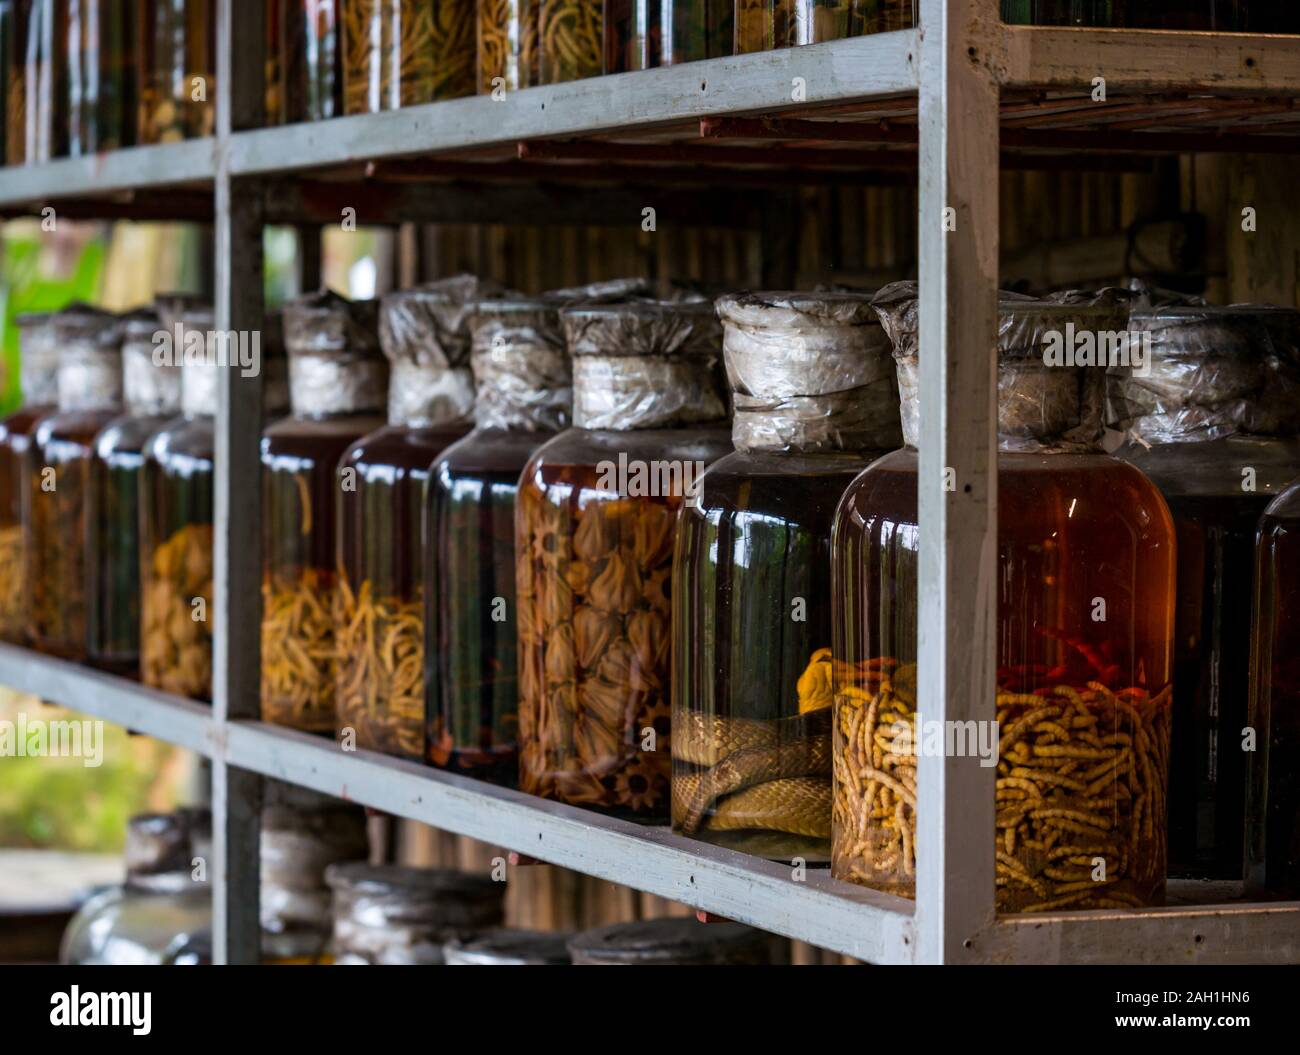 Traditional medicinal remedies with pickled preserved maggots & snake in glass jars, Thai Hai ethnic village, Thai Nguyen province, Vietnam, Asia Stock Photo